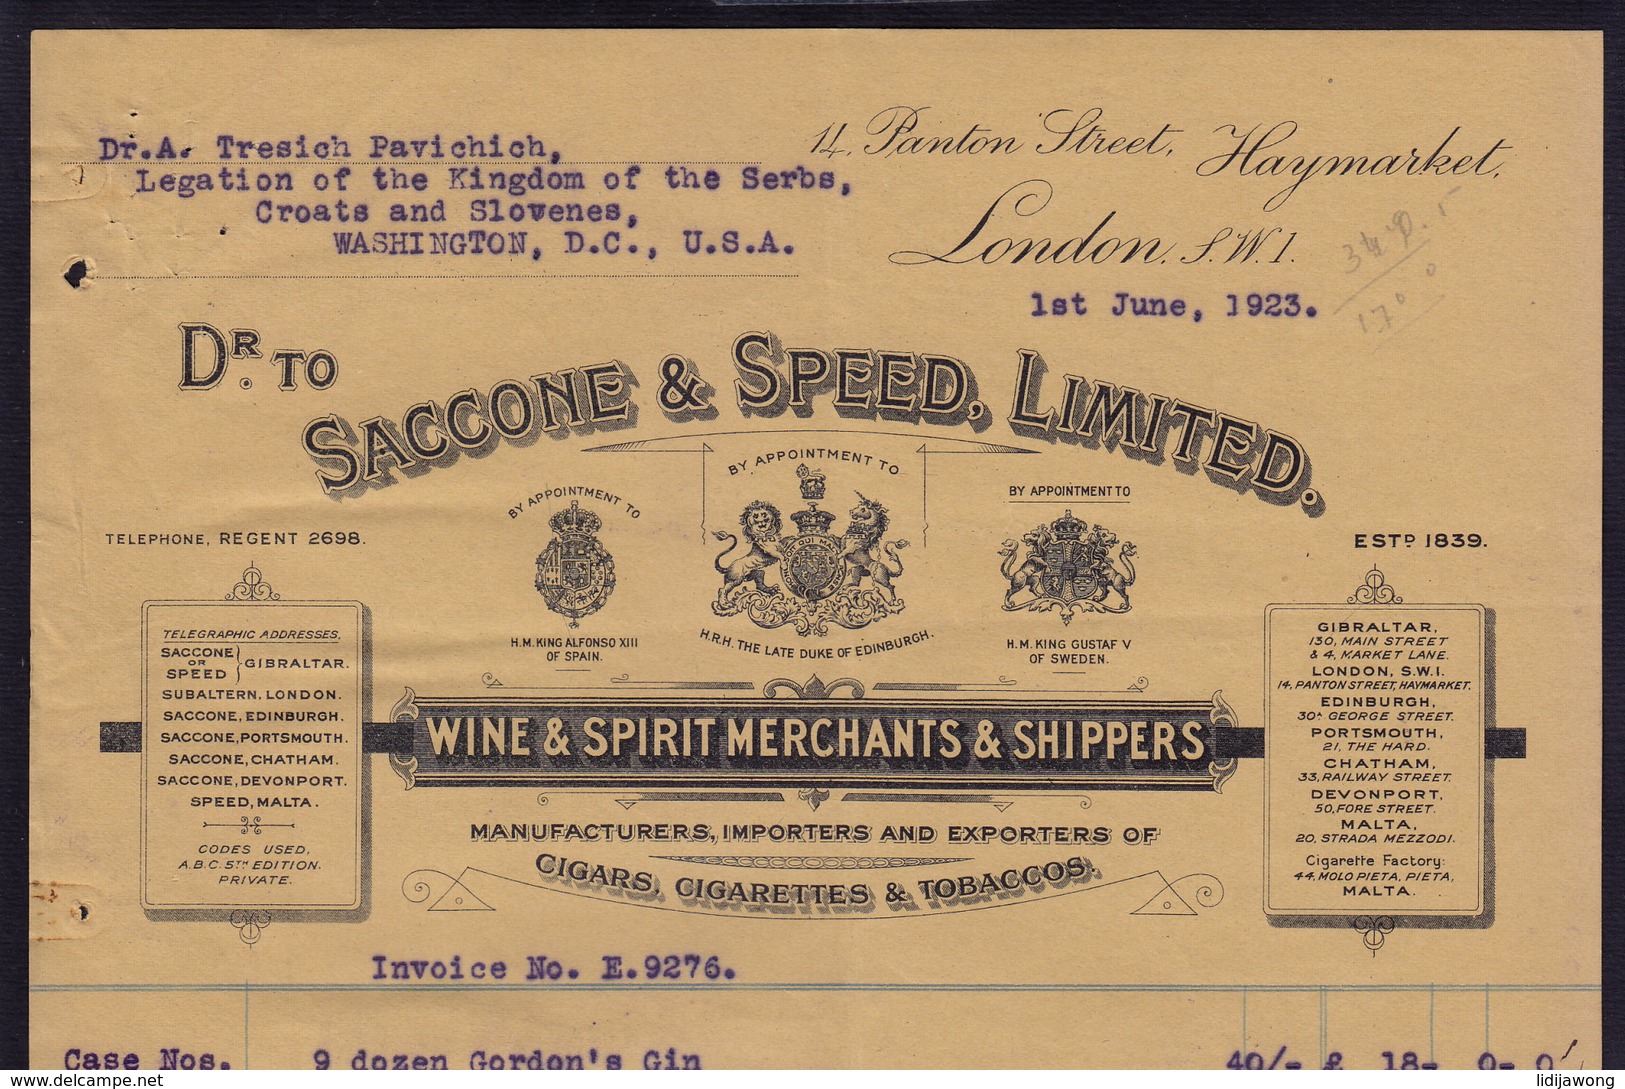 LONDON - SACCONE & SPEED - WINE CIGARS CIGARETTES - LETTER INVOICE FAKTURA 1923 (see Sales Conditions) - Royaume-Uni